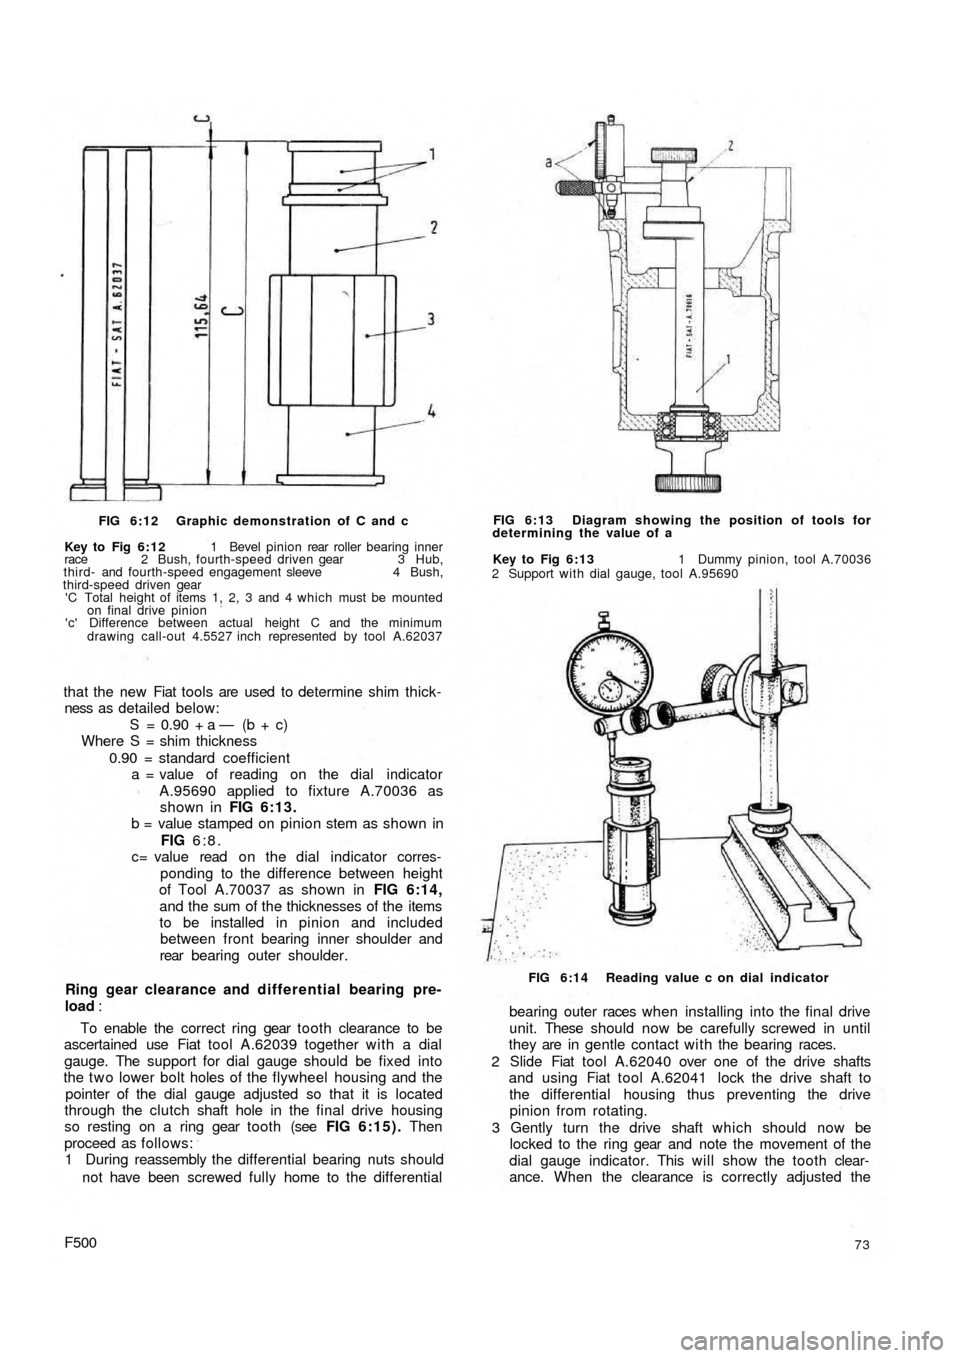 FIAT 500 1970 1.G Repair Manual FIG 6:12 Graphic demonstration  of C and c
Key to Fig 6:12 1 Bevel pinion rear roller bearing inner
race 2 Bush, fourth-speed driven gear 3 Hub,
third- and fourth-speed engagement sleeve 4 Bush,
third